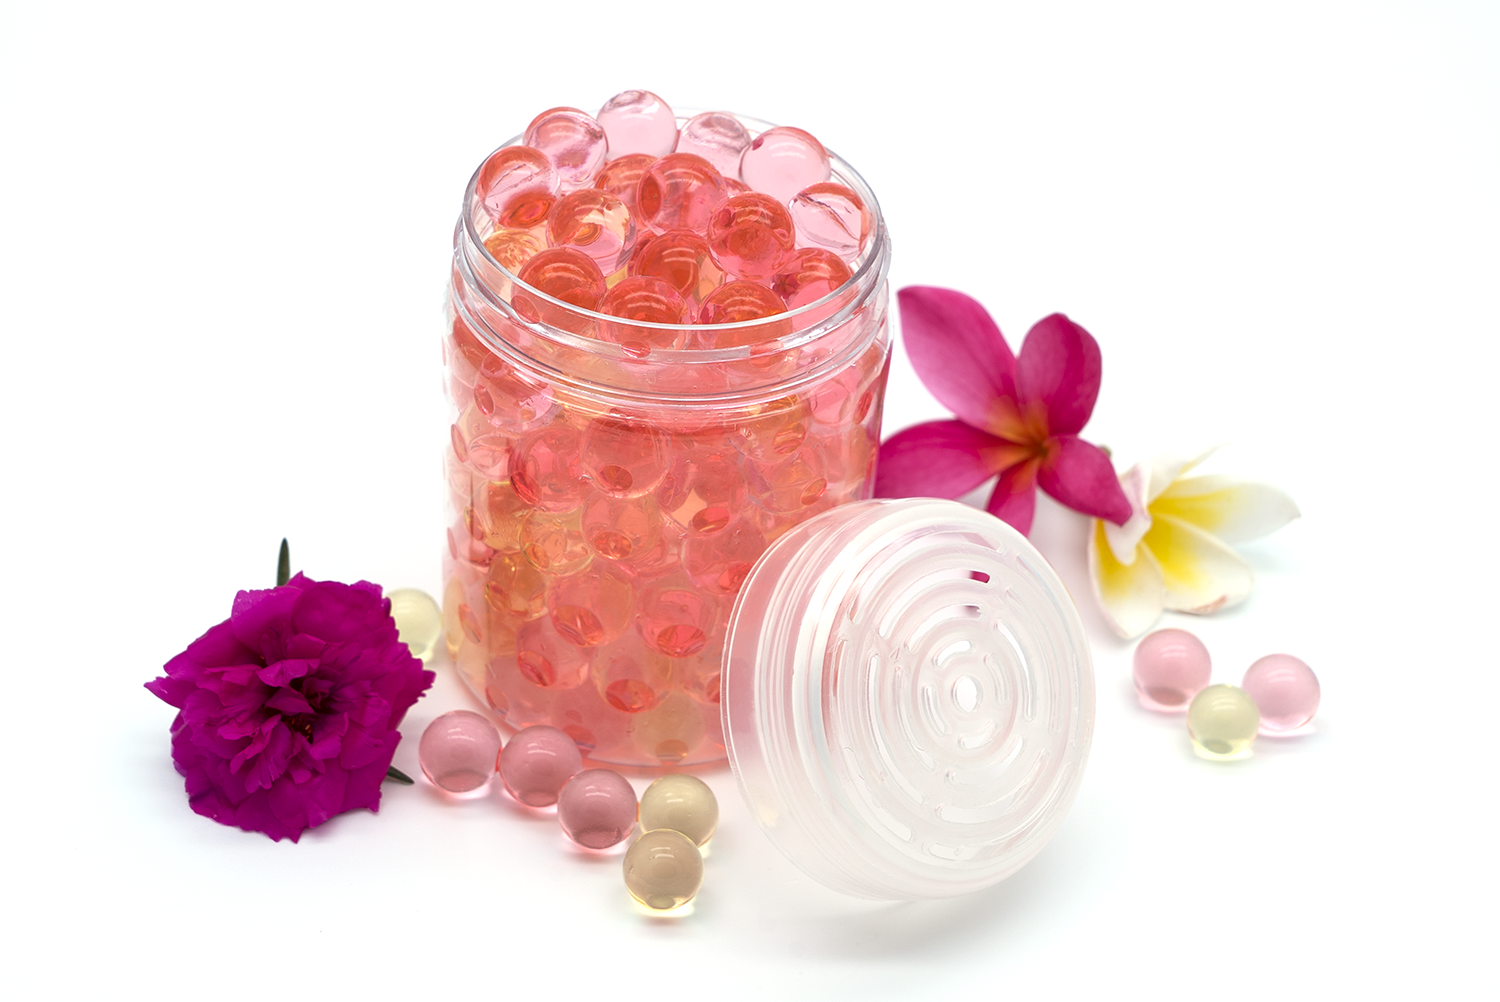 Demi brilliant fragrance beads to ensure the best possible food